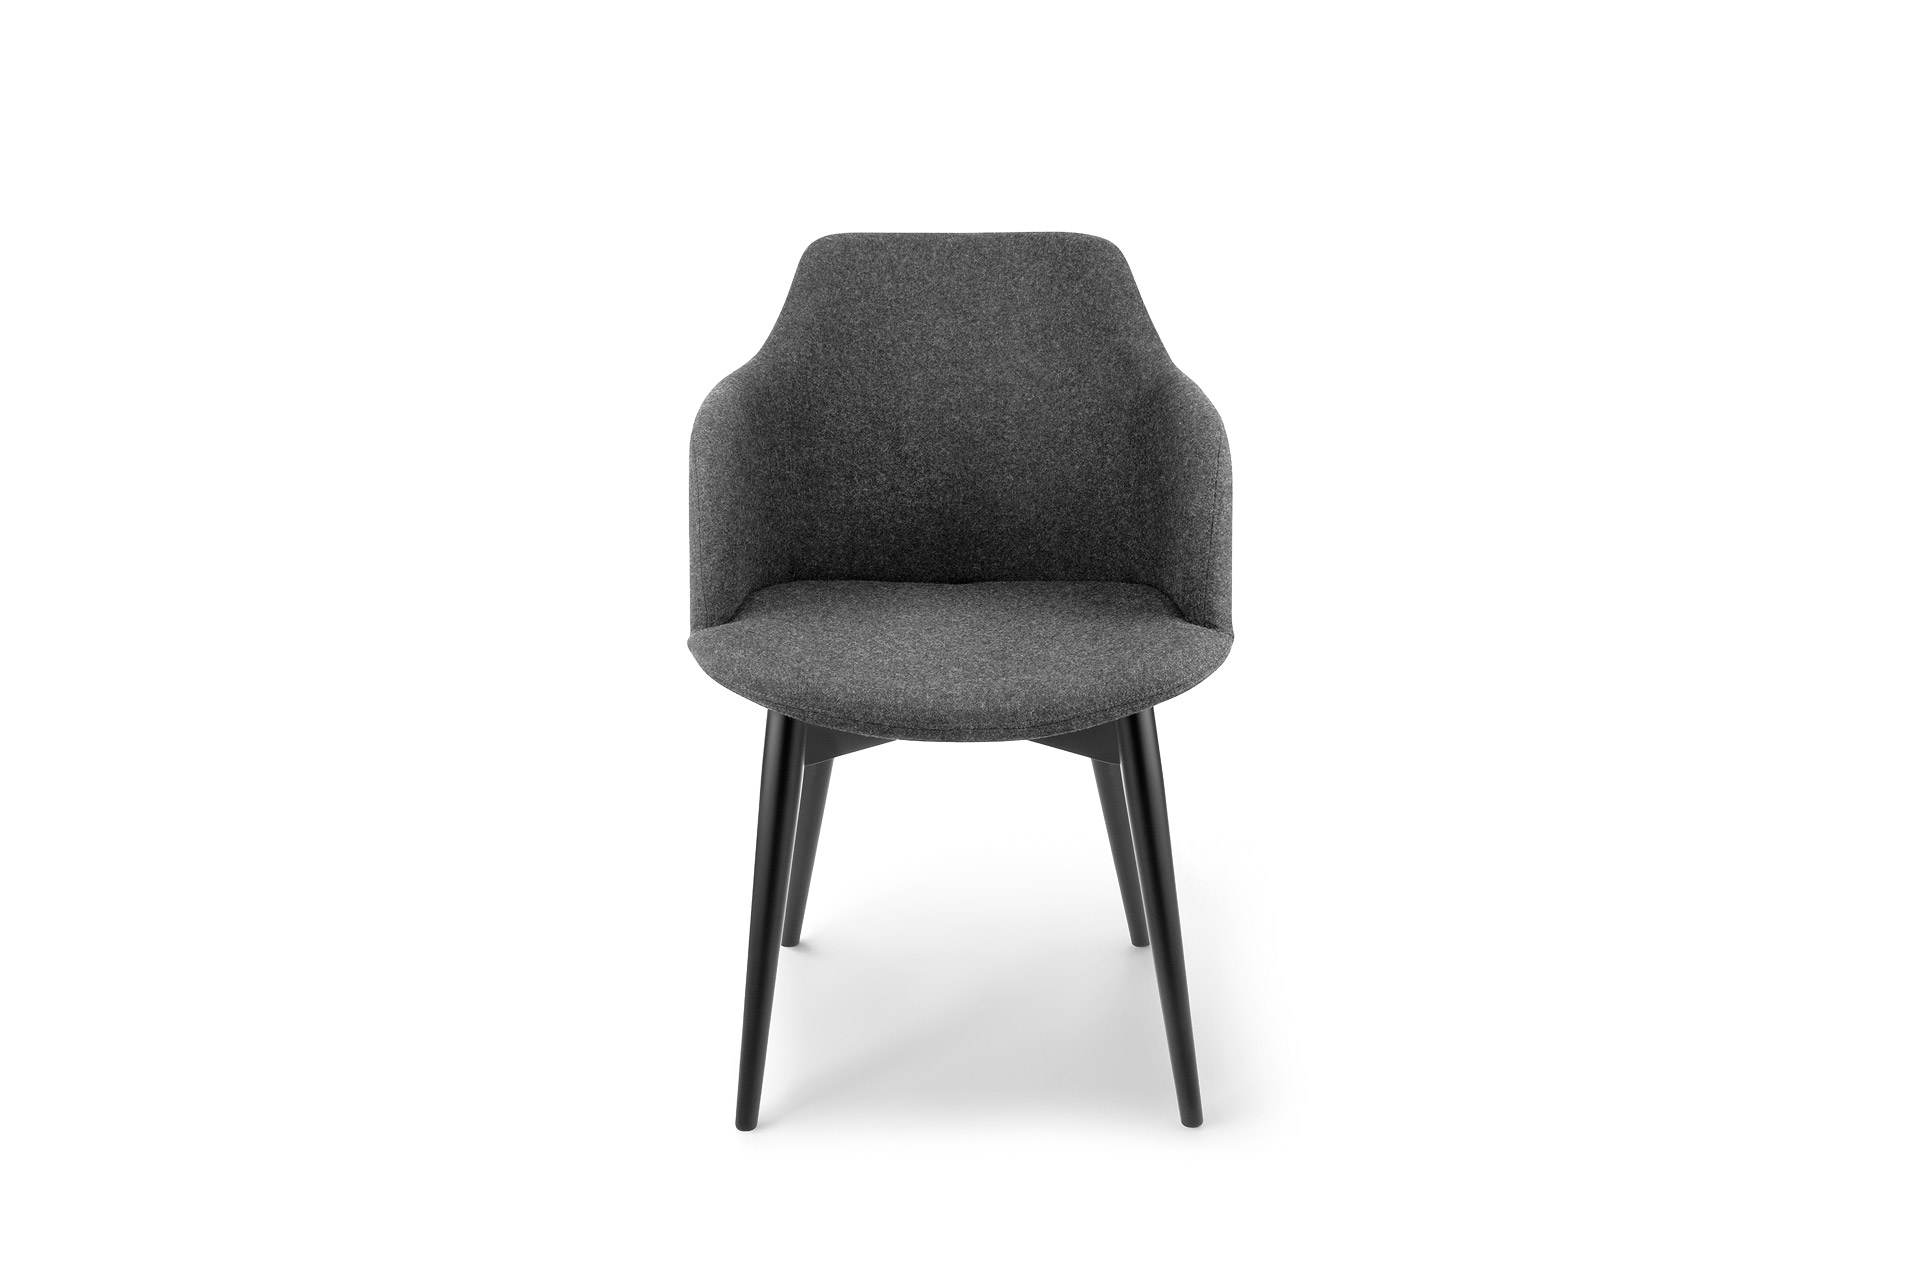 Healthcare Seating Alonzo Chair, front view, grey fabric